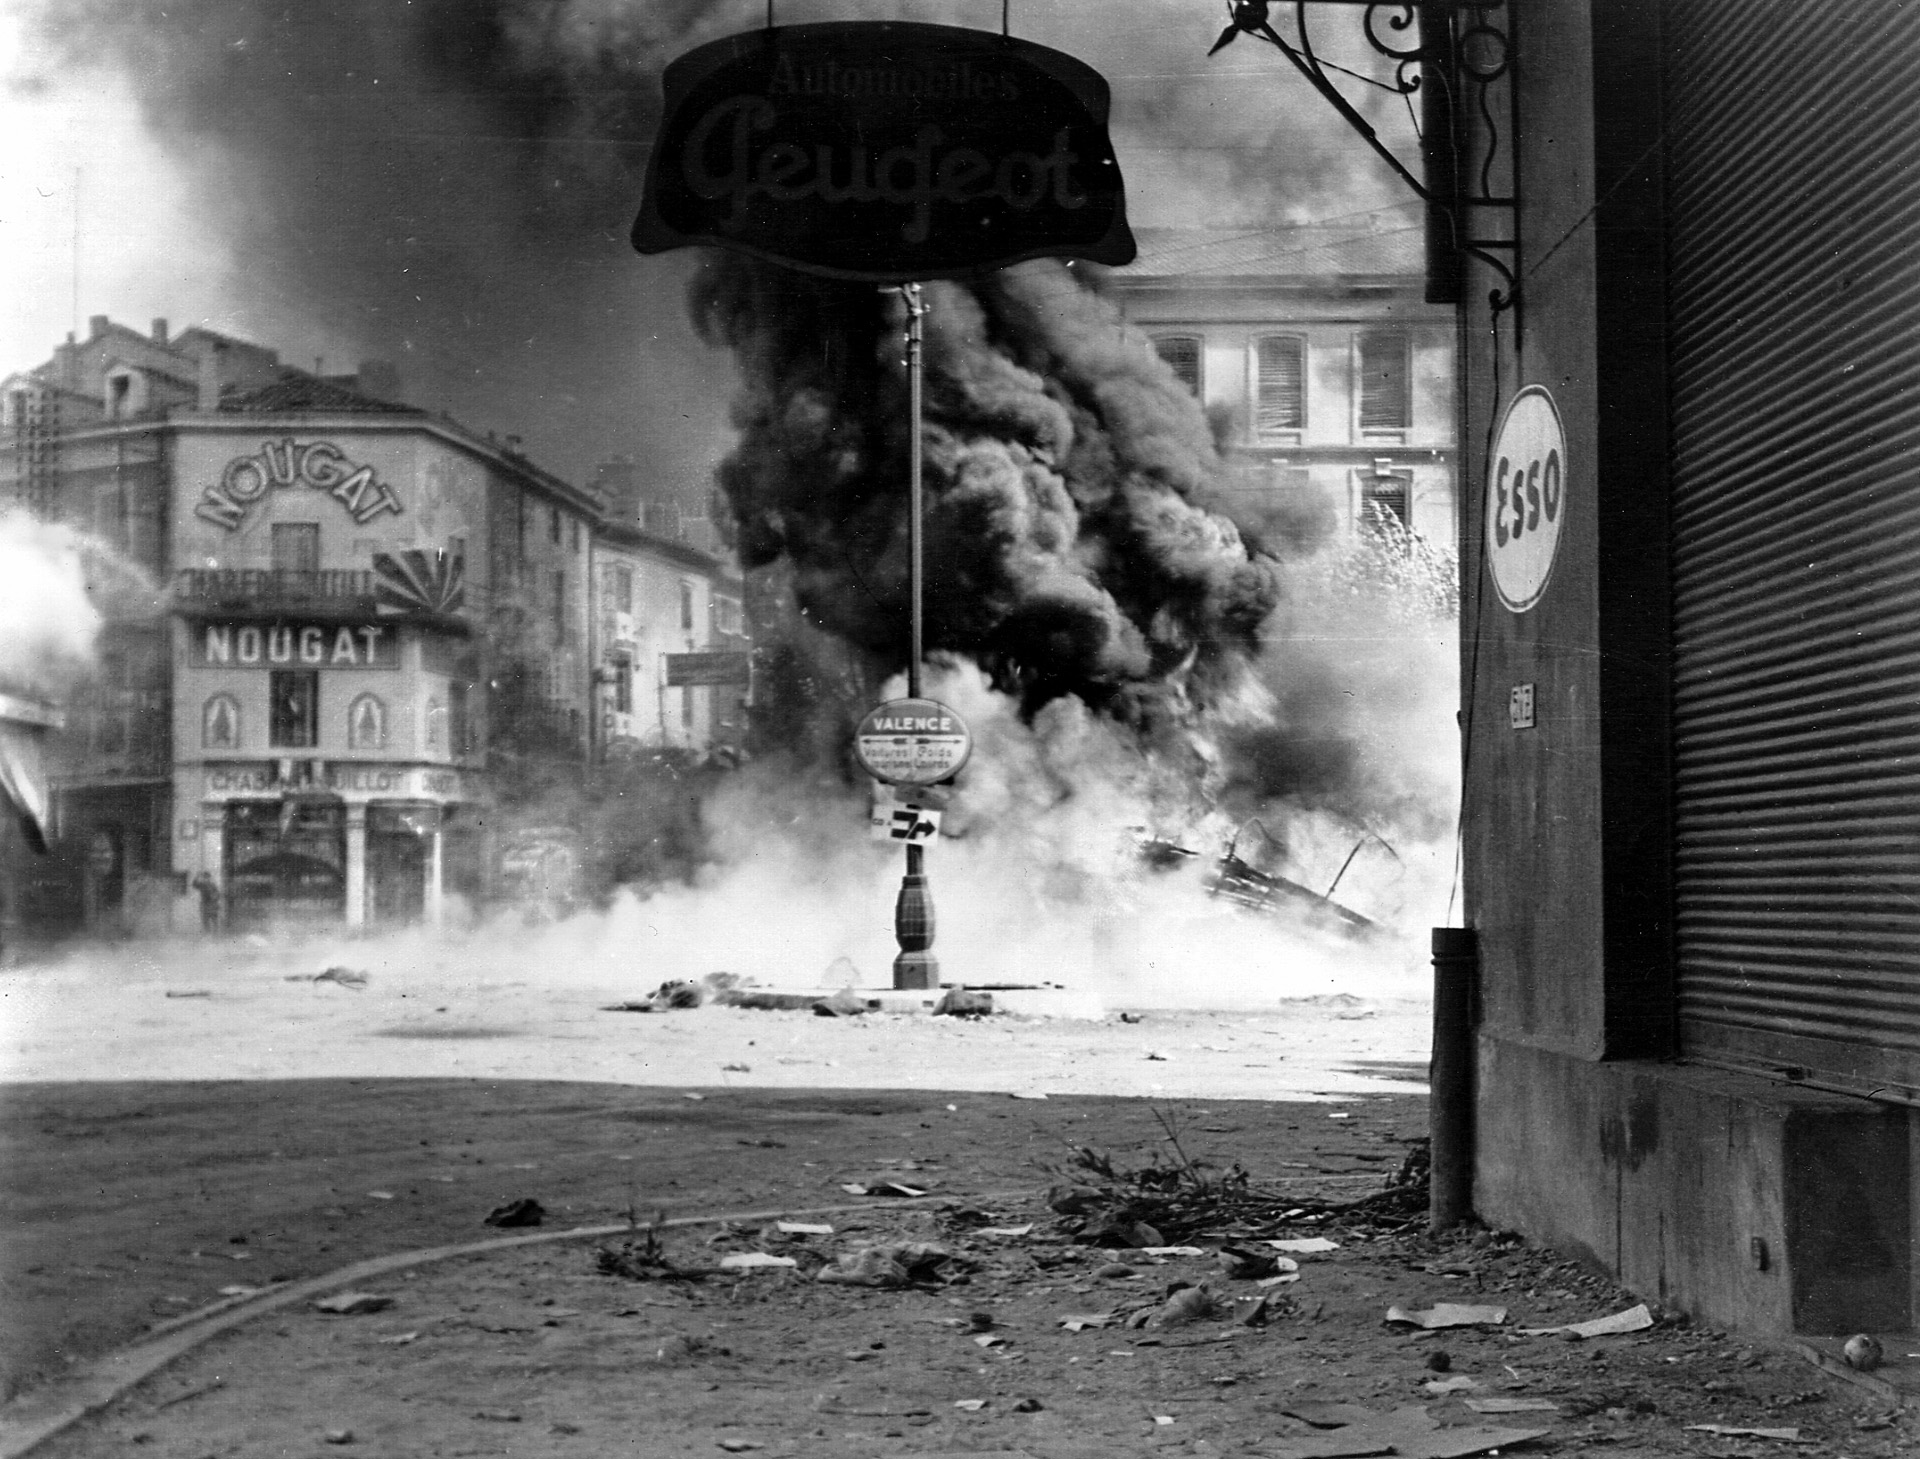  As the 36th Infantry Division is committed to the battle for the French town of Montelimar, German armored vehicles erupt in smoke and flame. The enemy forces in Montelimar had been caught in the open during an American fighter-bomber sweep as they attempted to retreat from the embattled town.